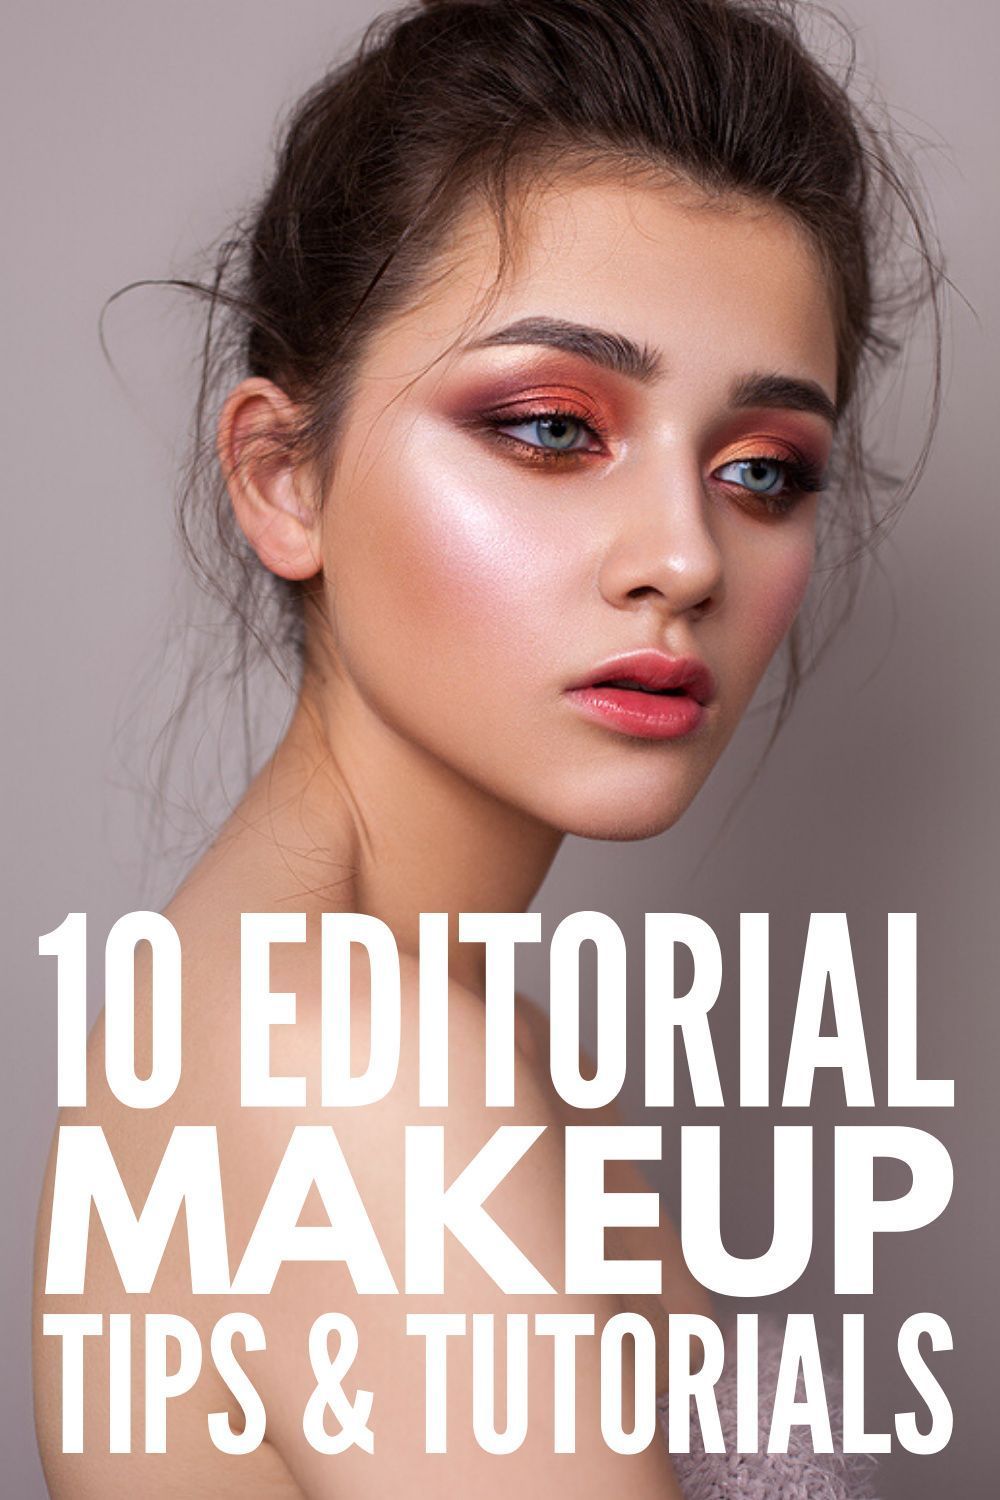 18 beauty Products editorial ideas